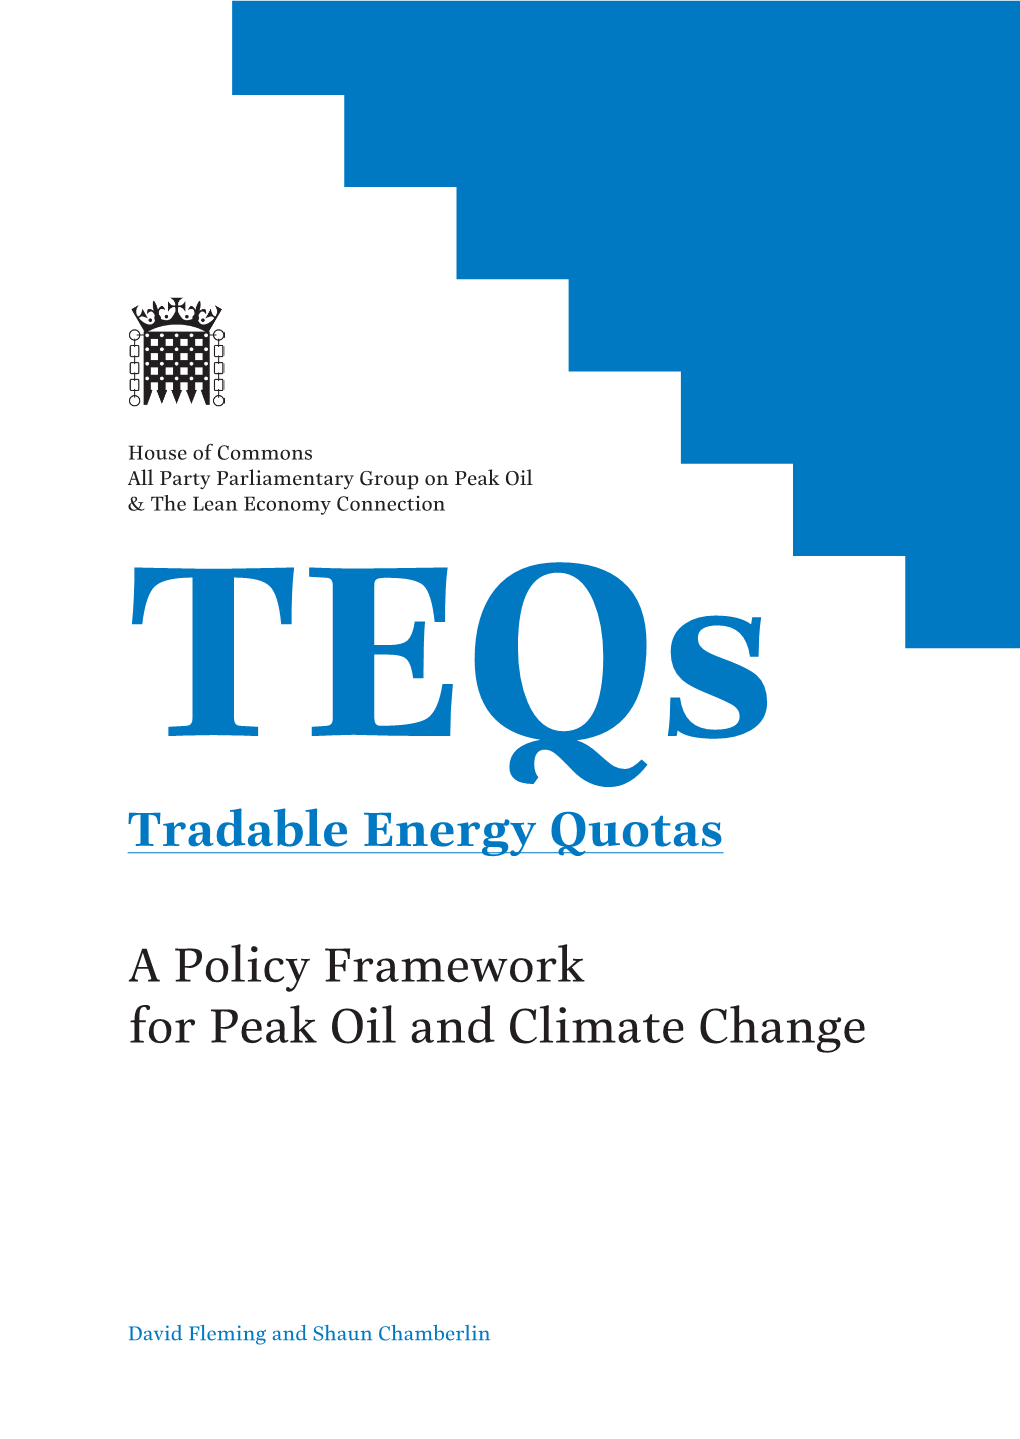 Teqs Tradable Energy Quotas: a Policy Framework for Peak Oil and Climate Change 4